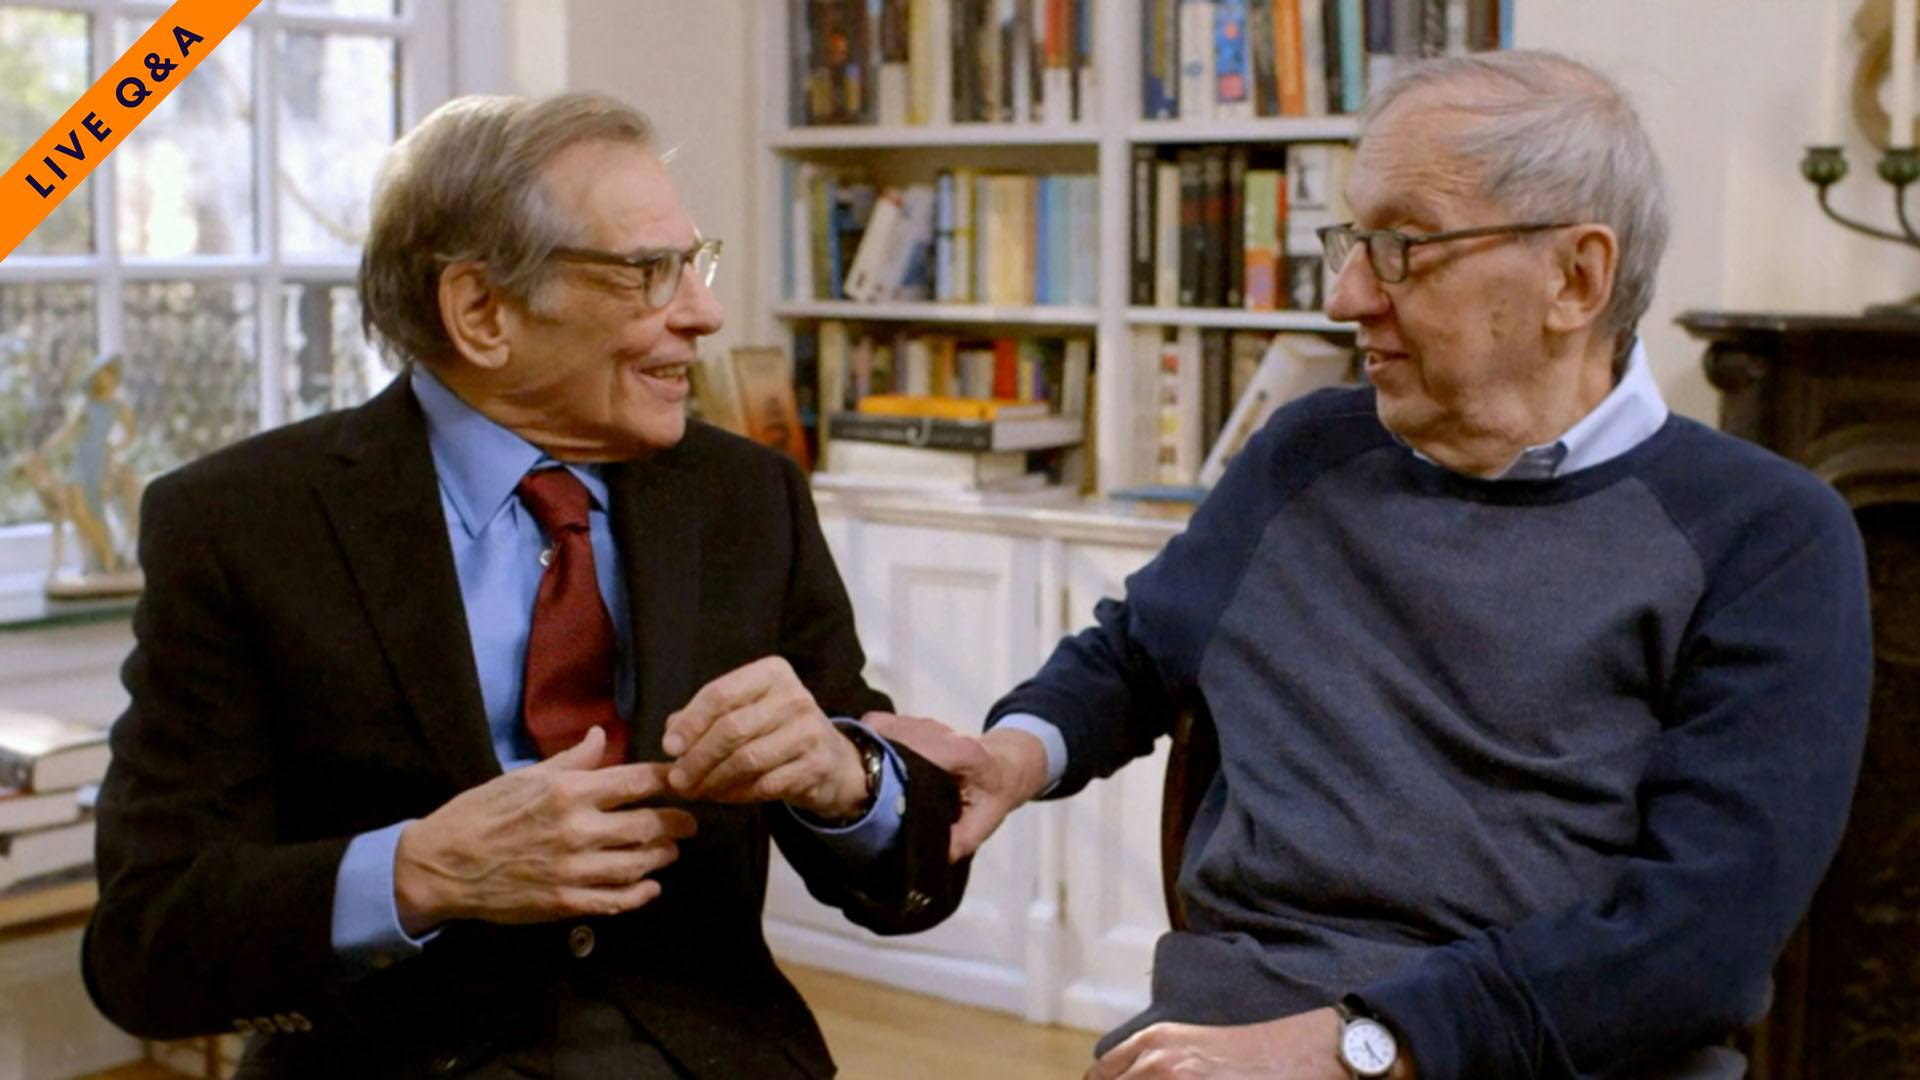 TURN EVERY PAGE – THE ADVENTURES OF ROBERT CARO AND ROBERT GOTTLIEB